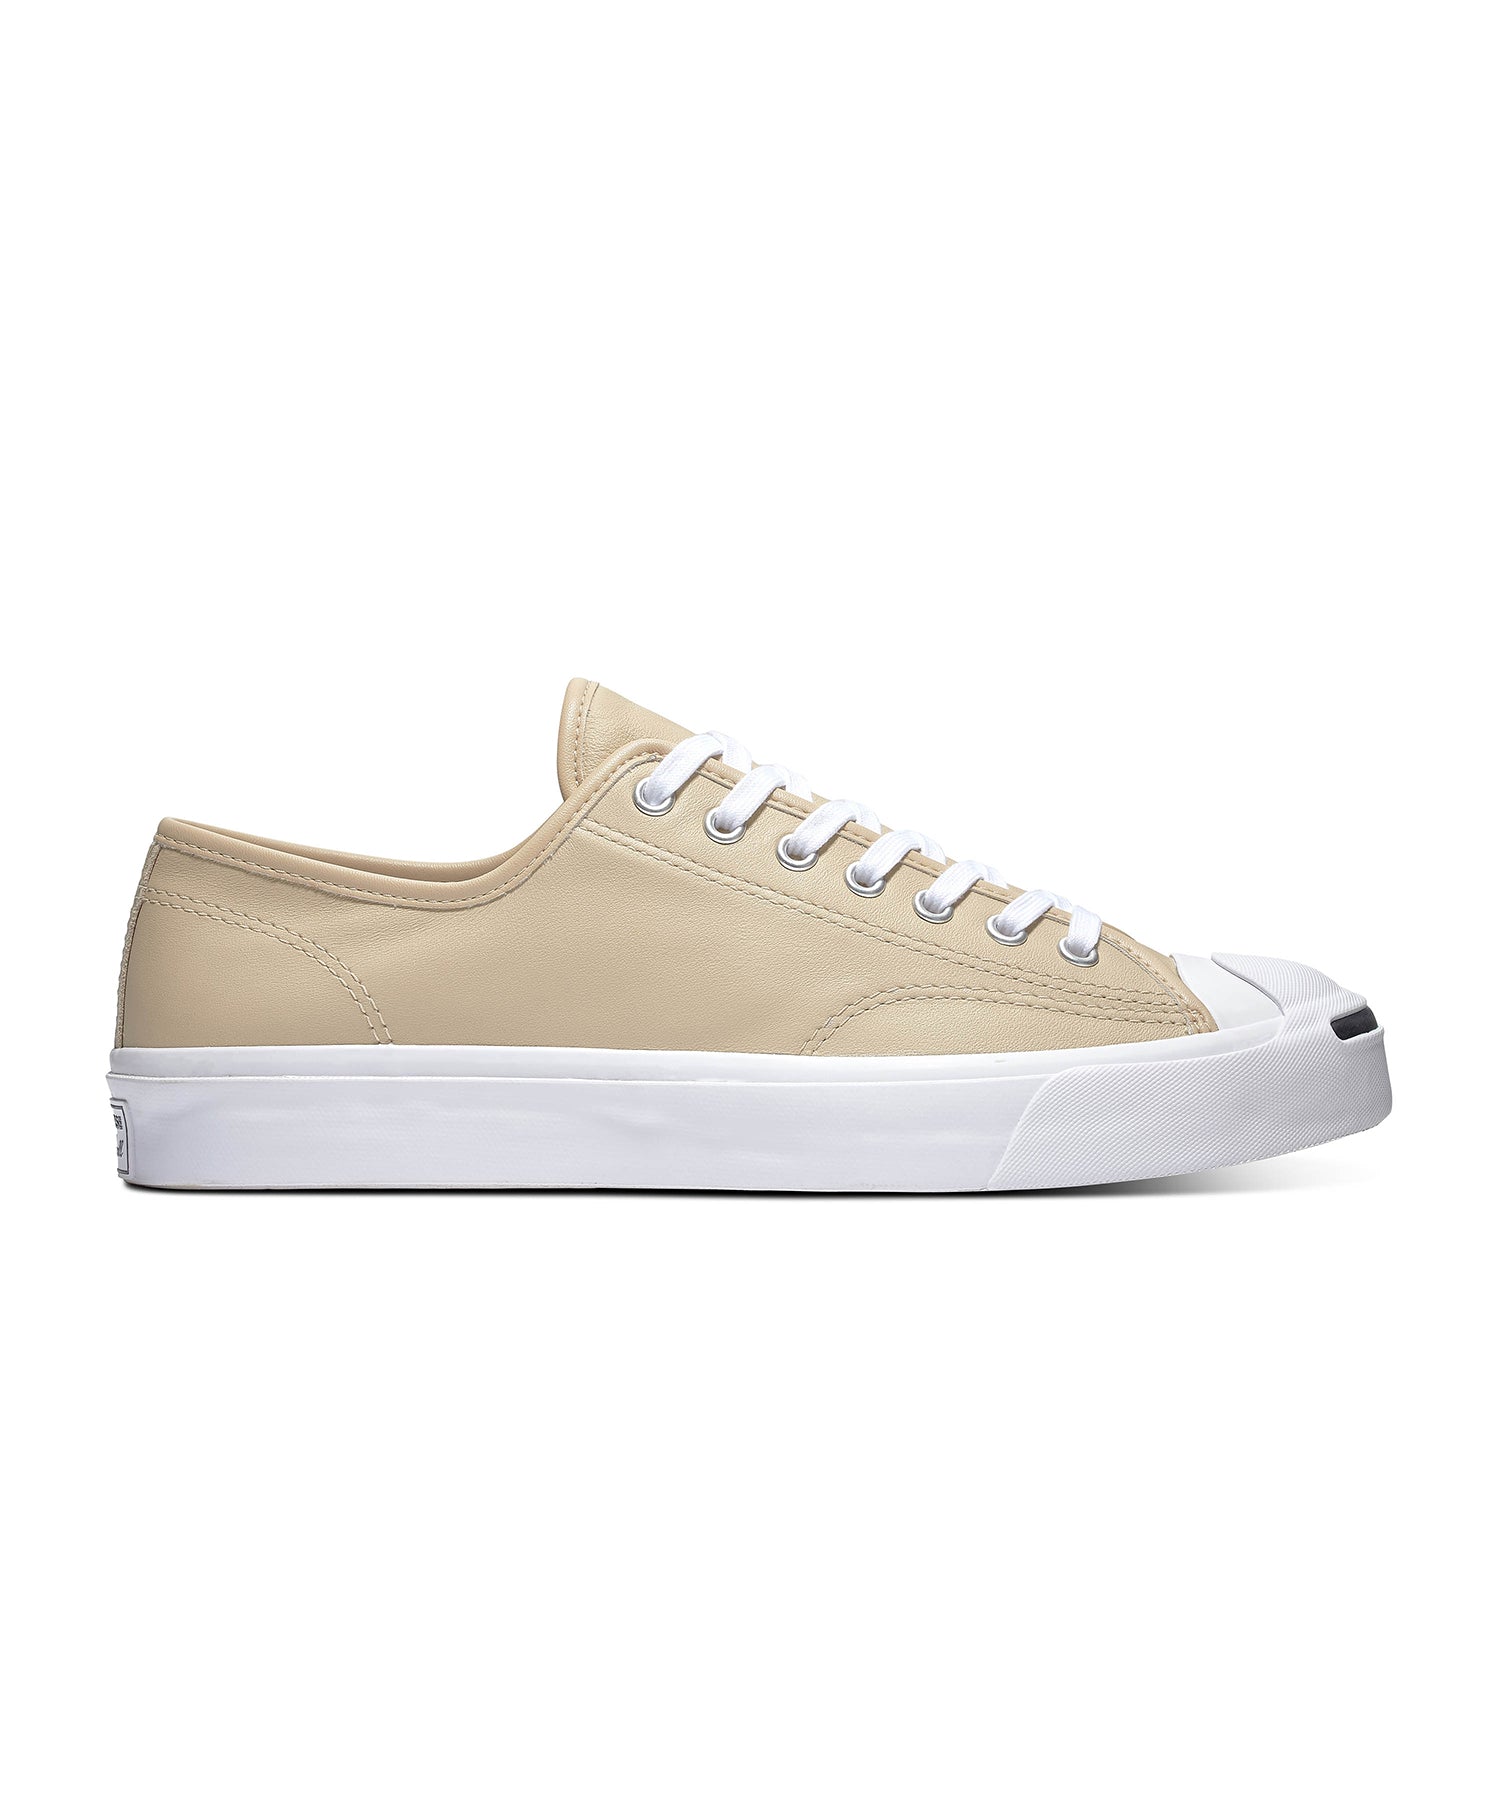 converse jack purcell brown leather